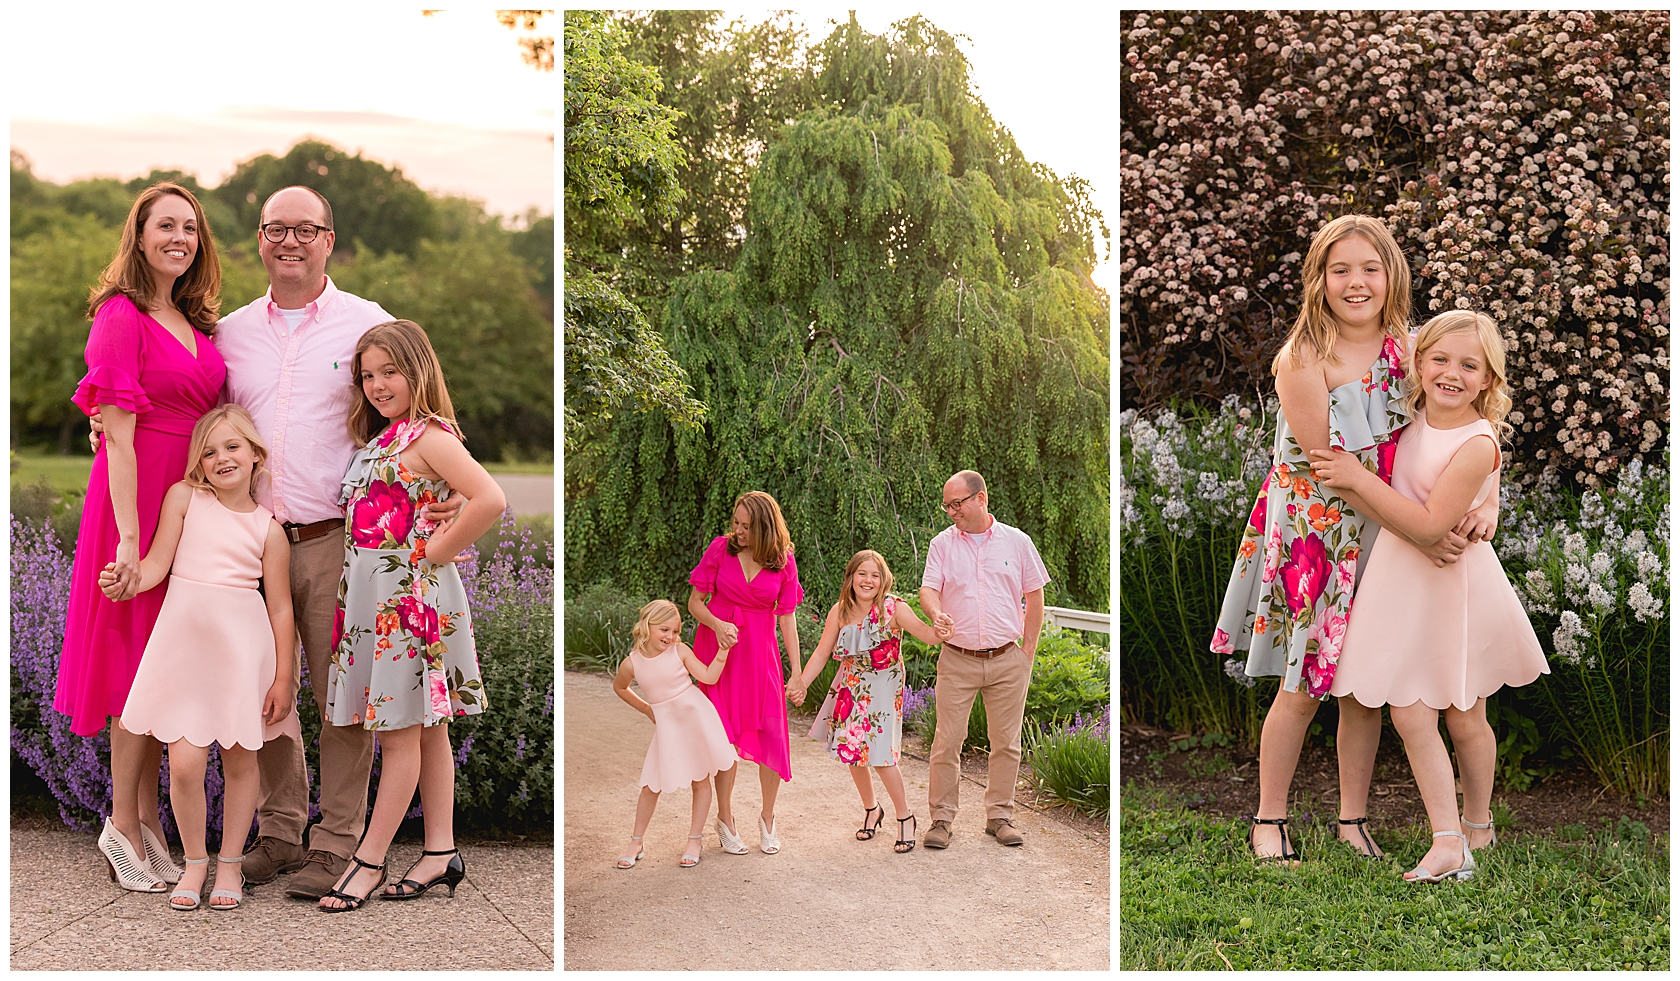 Family Photographer Kevin and Anna Photography at the University of Kentucky Arboretum in Lexington, Kentucky